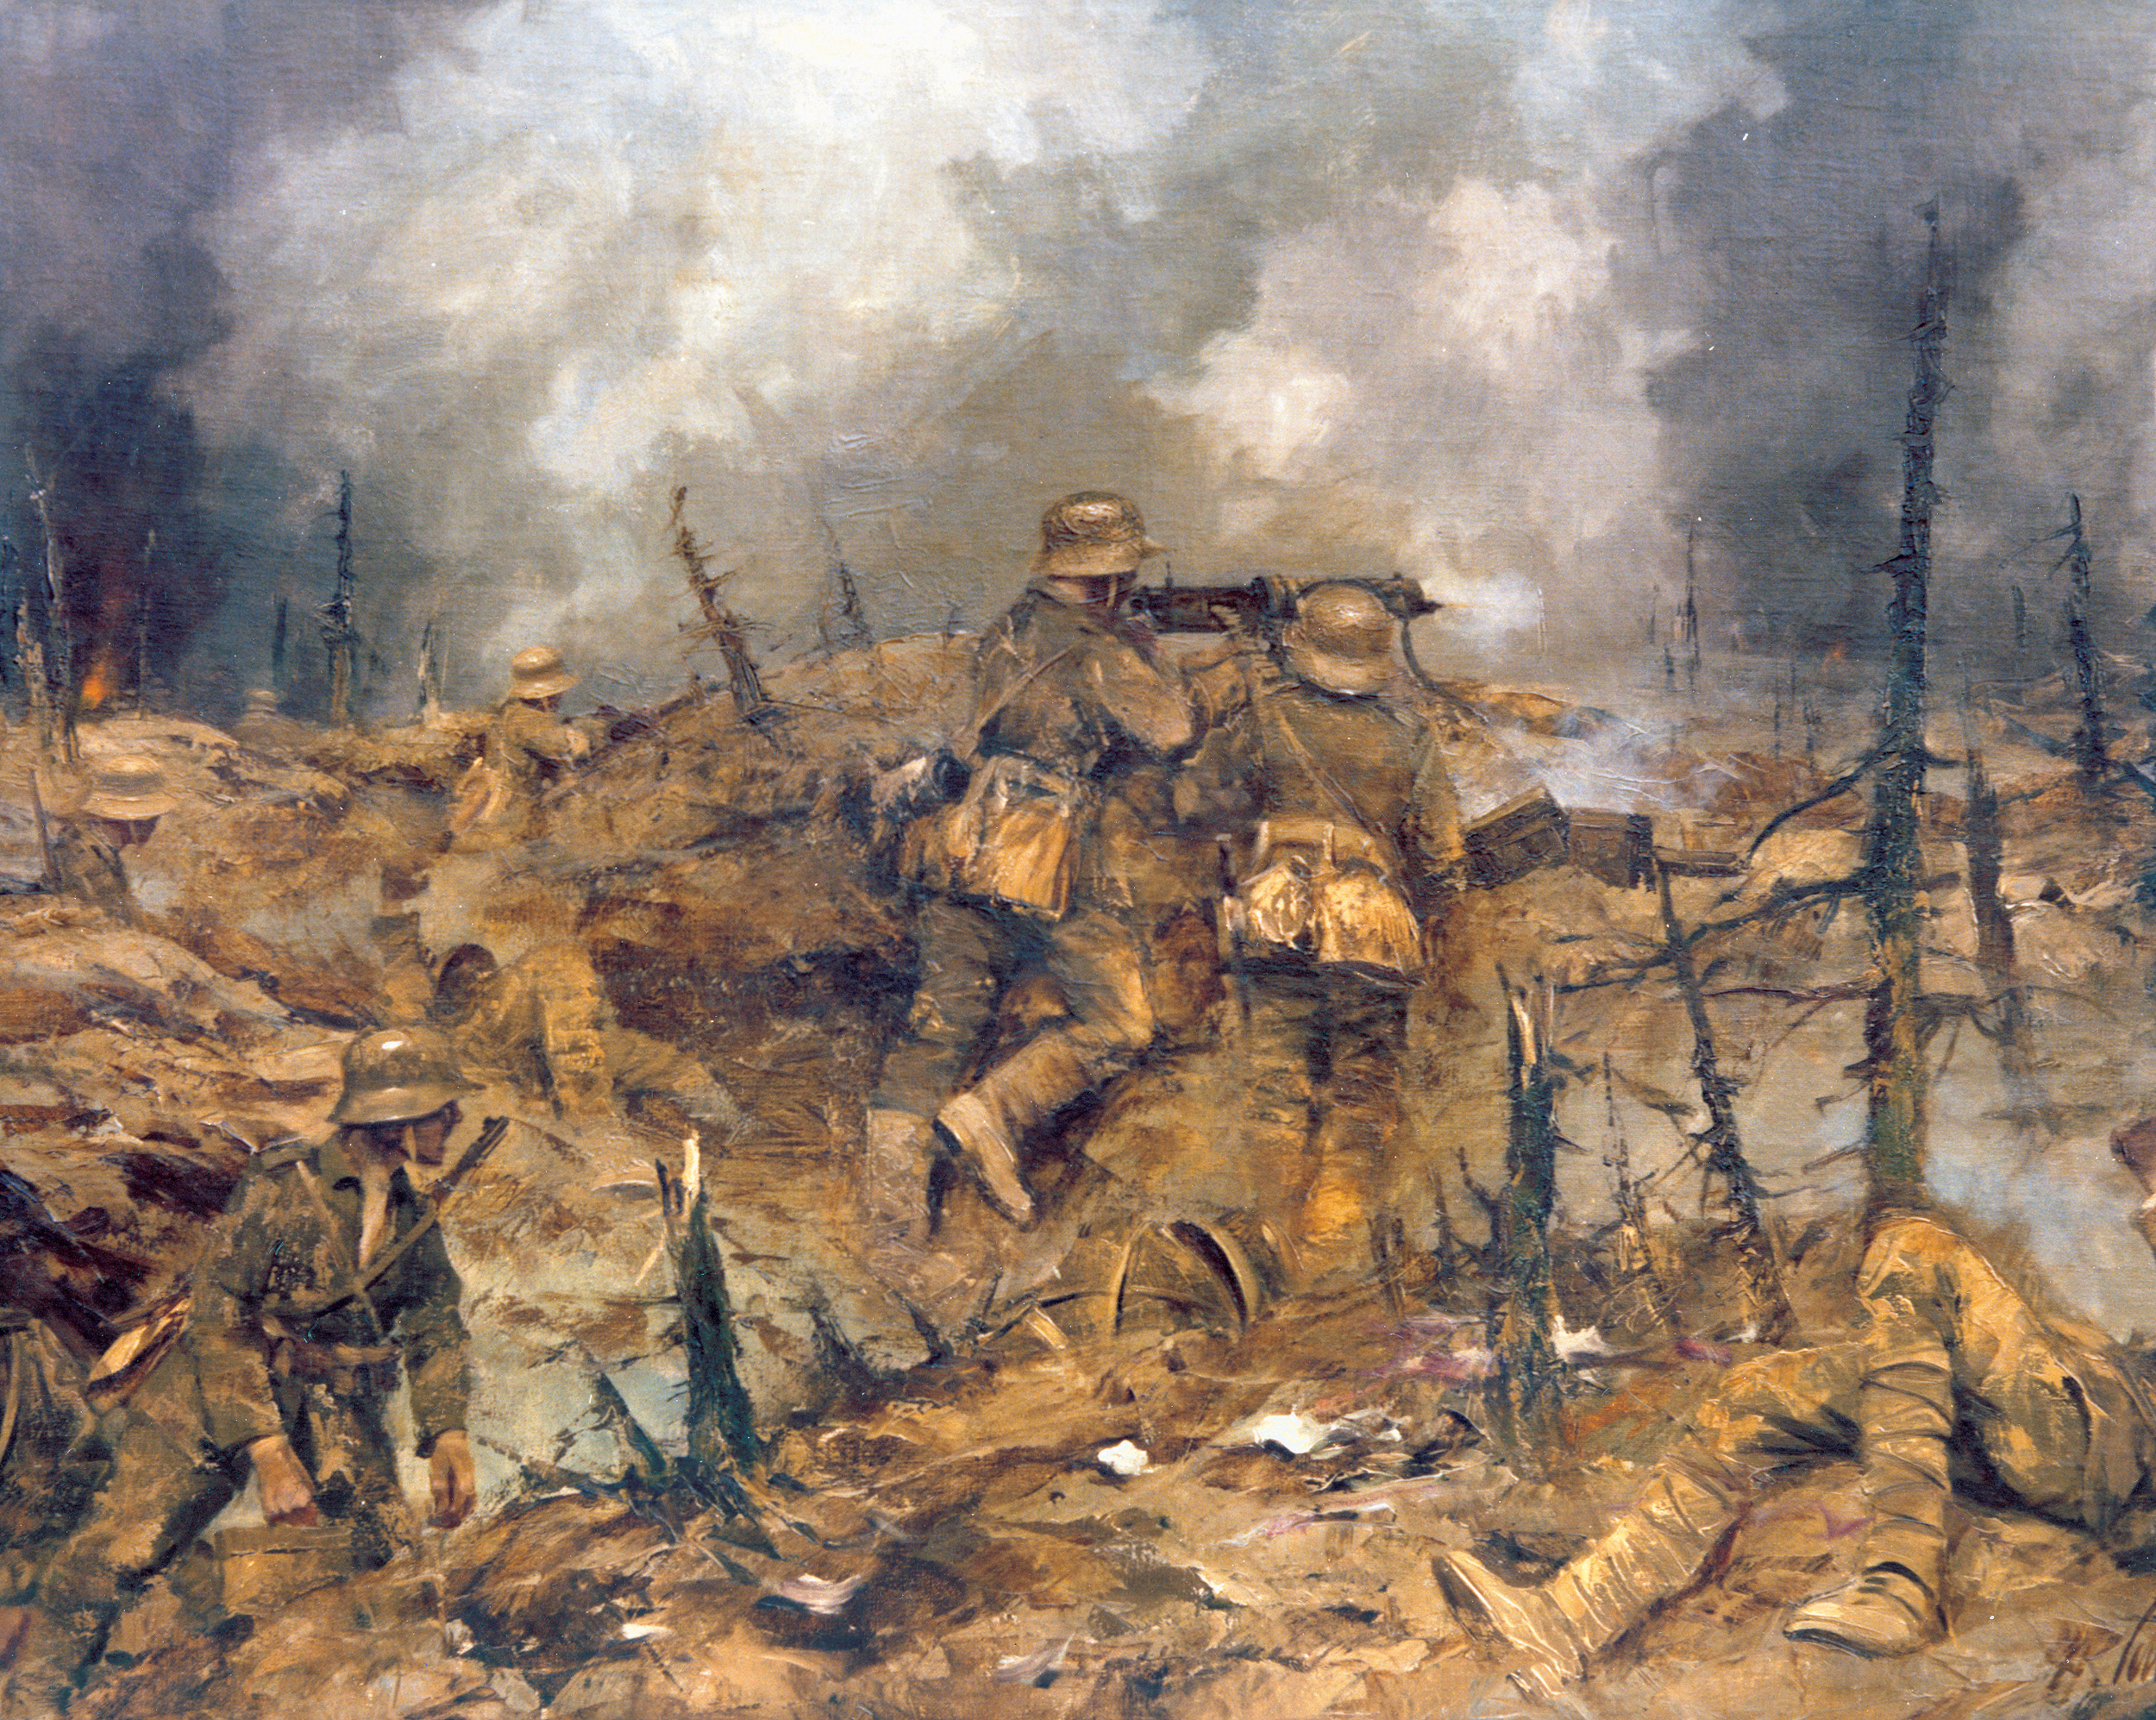 Herbert Schnurpel crafted this painting of a German machine gun crew at Verdun. It was captured by the Americans in World War II.